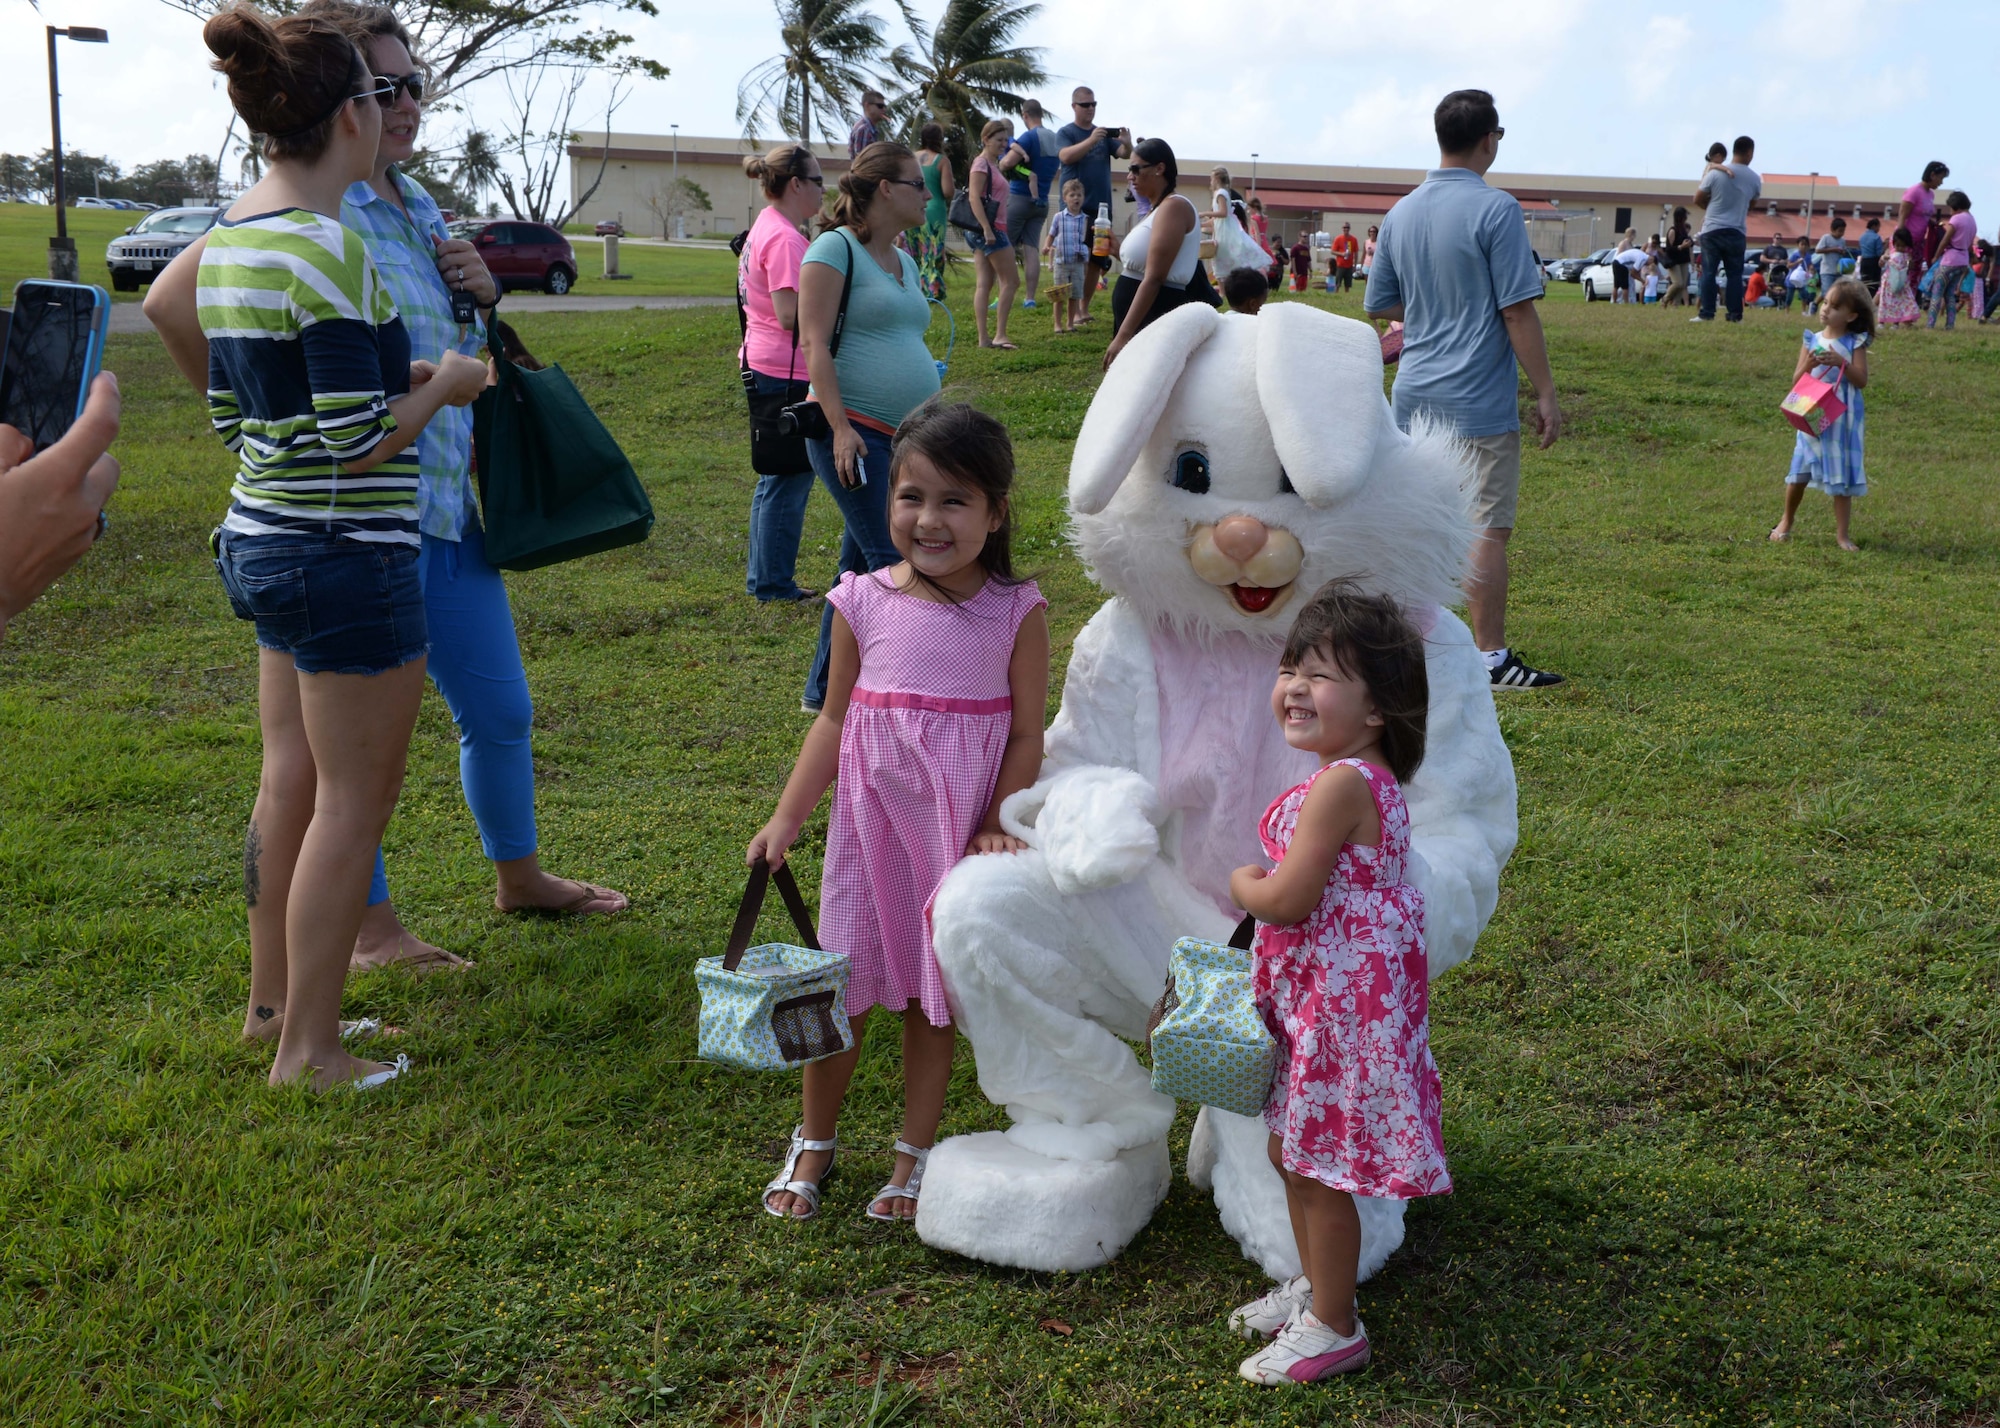 Children pose with the Easter bunny during an Easter egg hunt April 4, 2015, at Arc Light Memorial Park on Andersen Air Force Base, Guam. The event, which used approximately 7,000 eggs, was sponsored by a host of base agencies and drew more than 650 children. (U.S. Air Force photo by Senior Airman Cierra Presentado/Released)